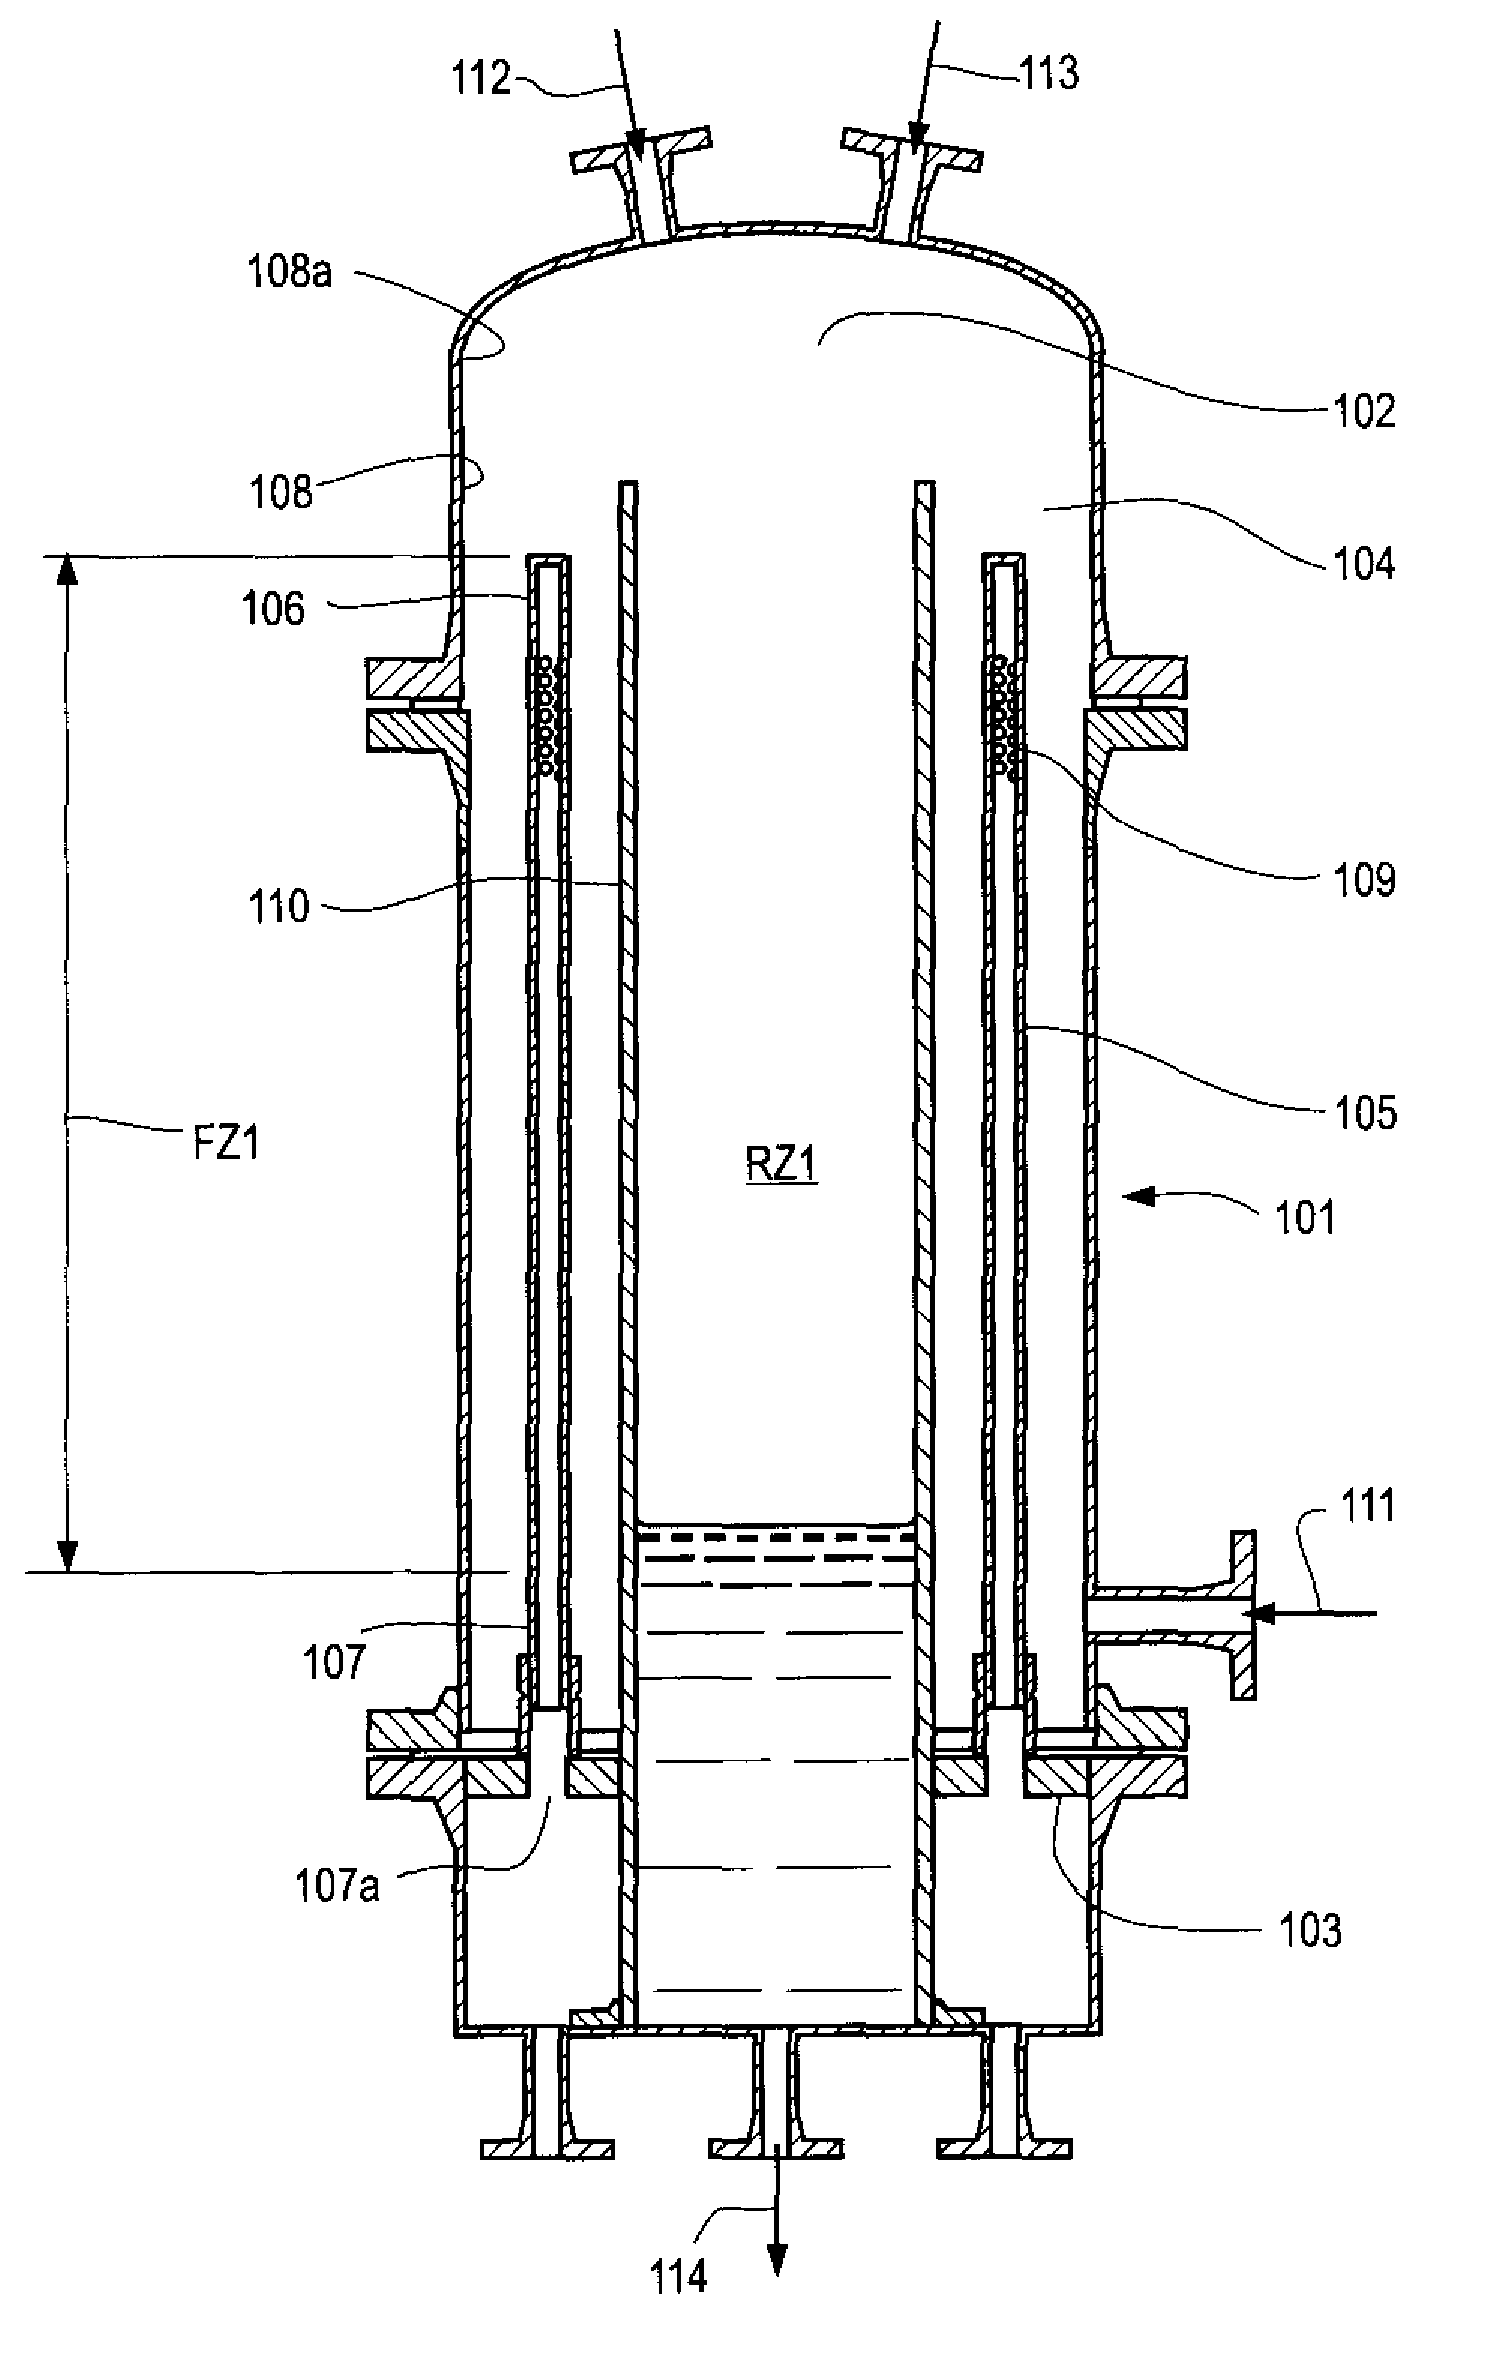 Apparatus and Process for the Separation of Solids and Liquids